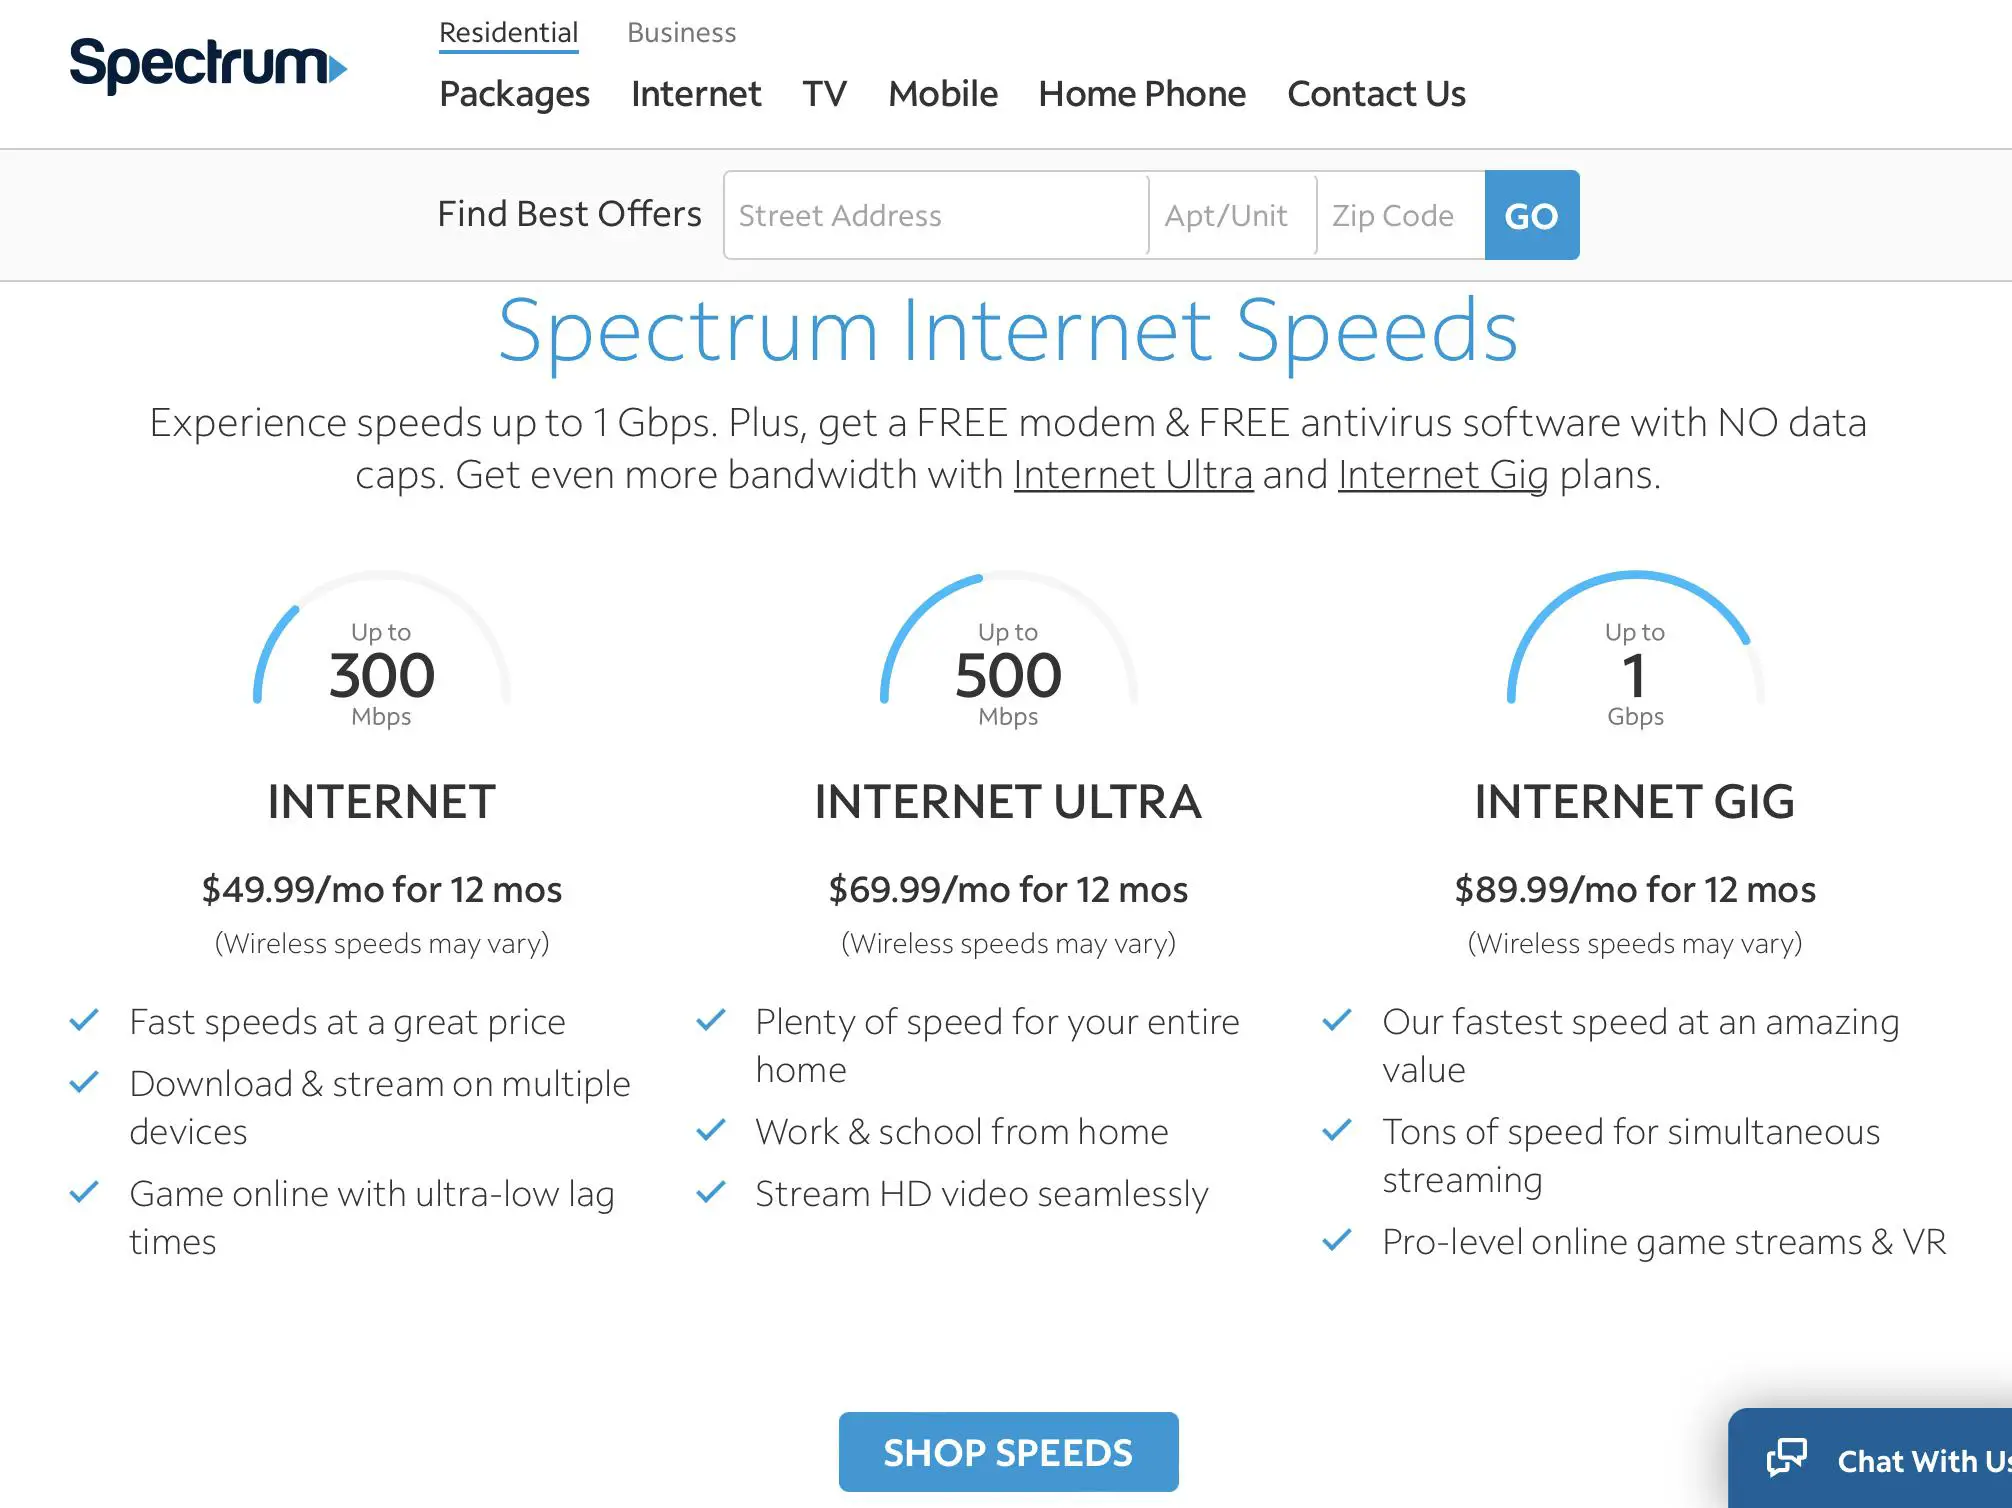 How Fast is Spectrum Ultra